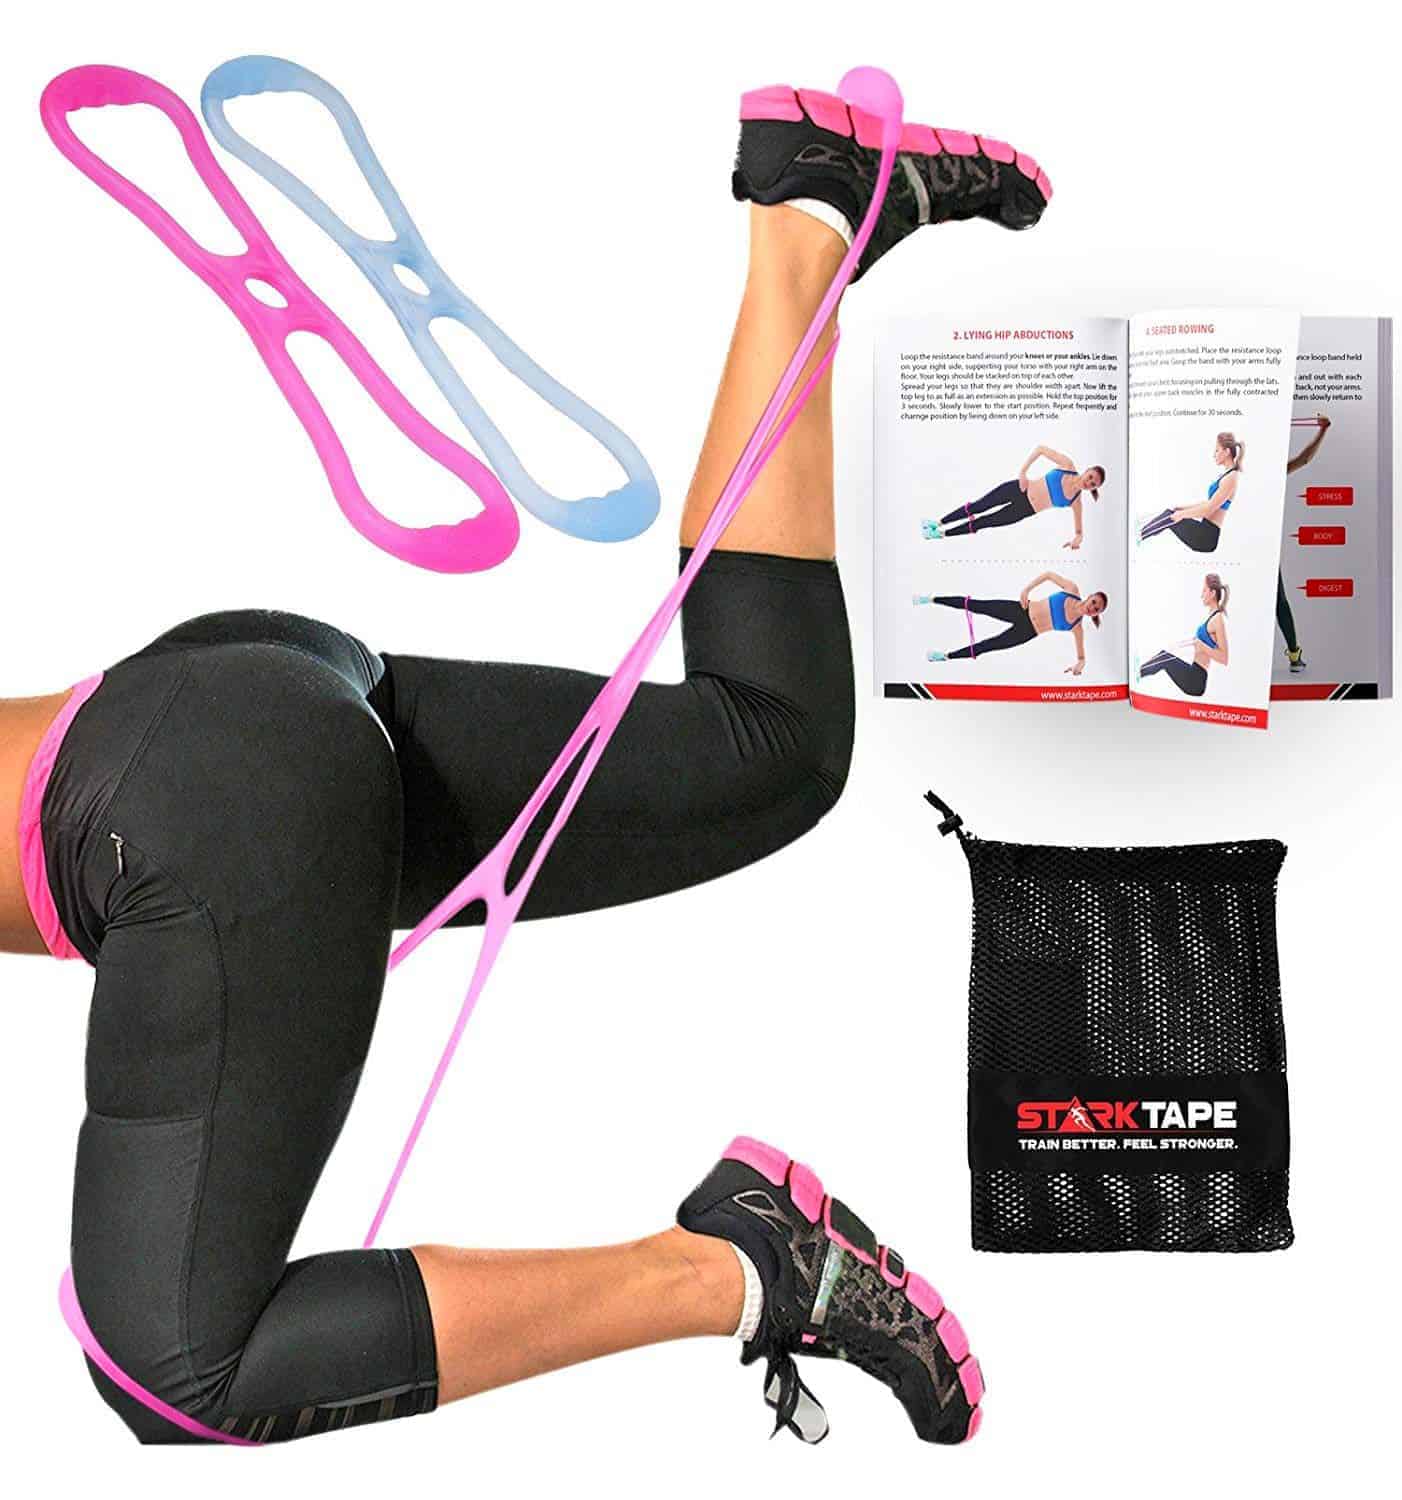 Booty Band Workout: 10 Glute Band Exercises for Killer Curves - Atemi Sports